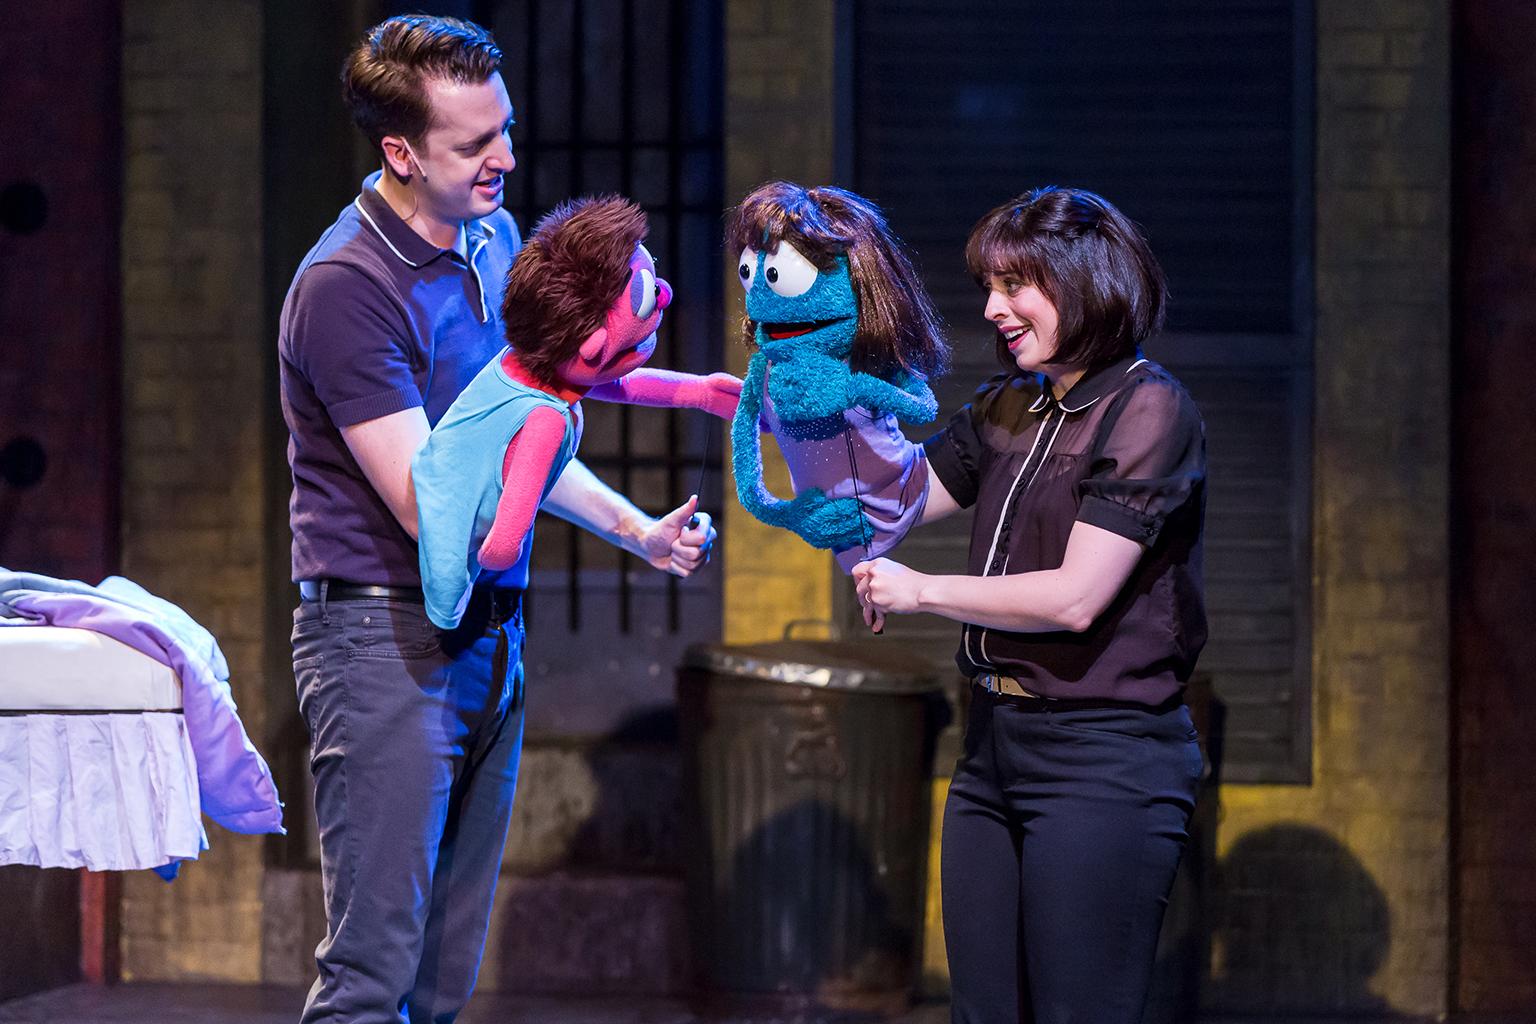 Jackson Evans and Leah Morrow in “Avenue Q” at Mercury Theater. (Credit: Brett A. Beiner)